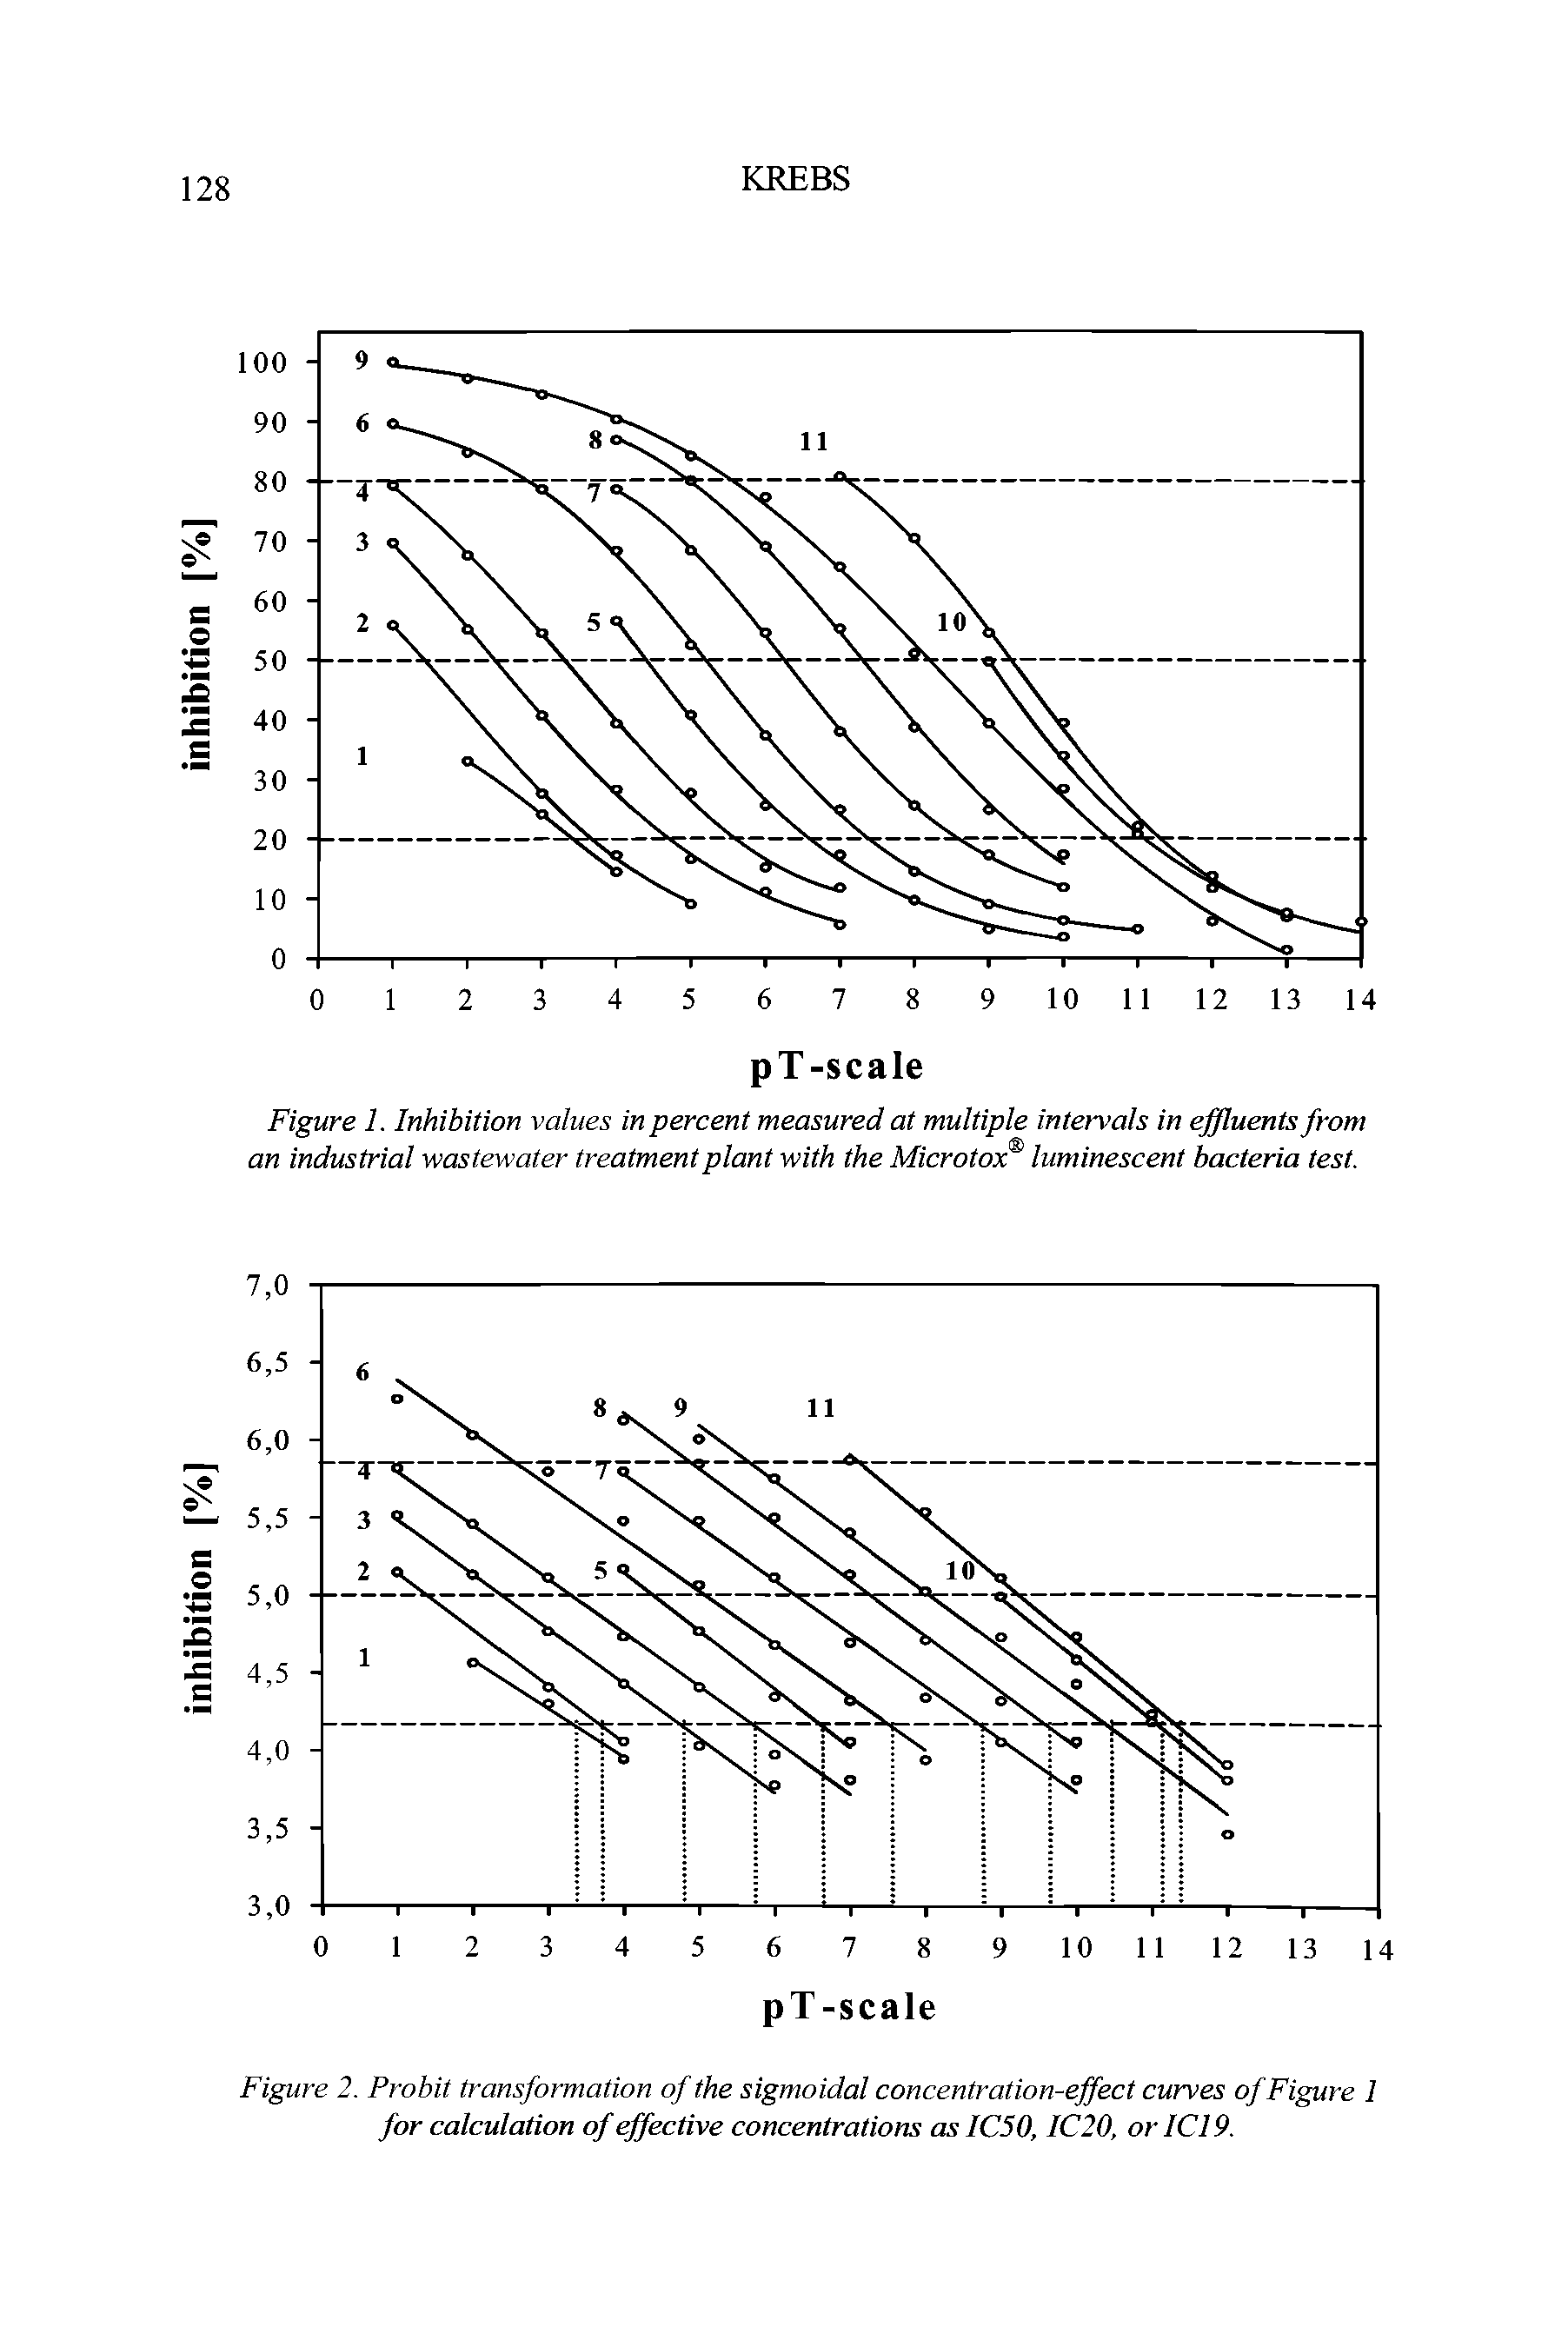 Figure 2. Probit transformation of the sigmoidal concentration-effect curves of Figure 1 for calculation of effective concentrations as IC50, IC20, or IC19.